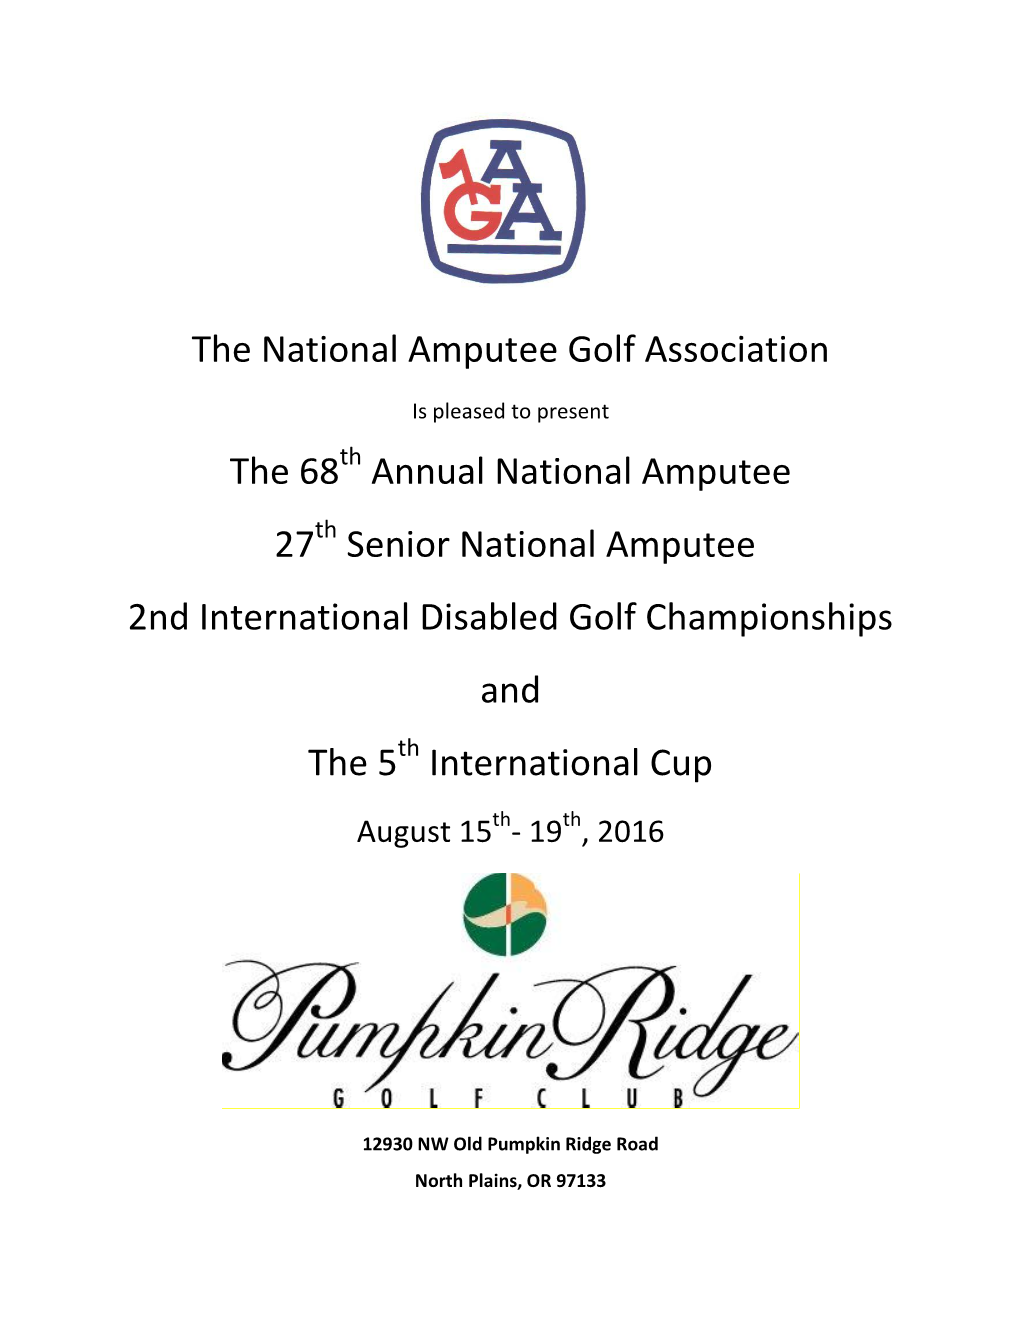 The National Amputee Golf Association the 68 Annual National